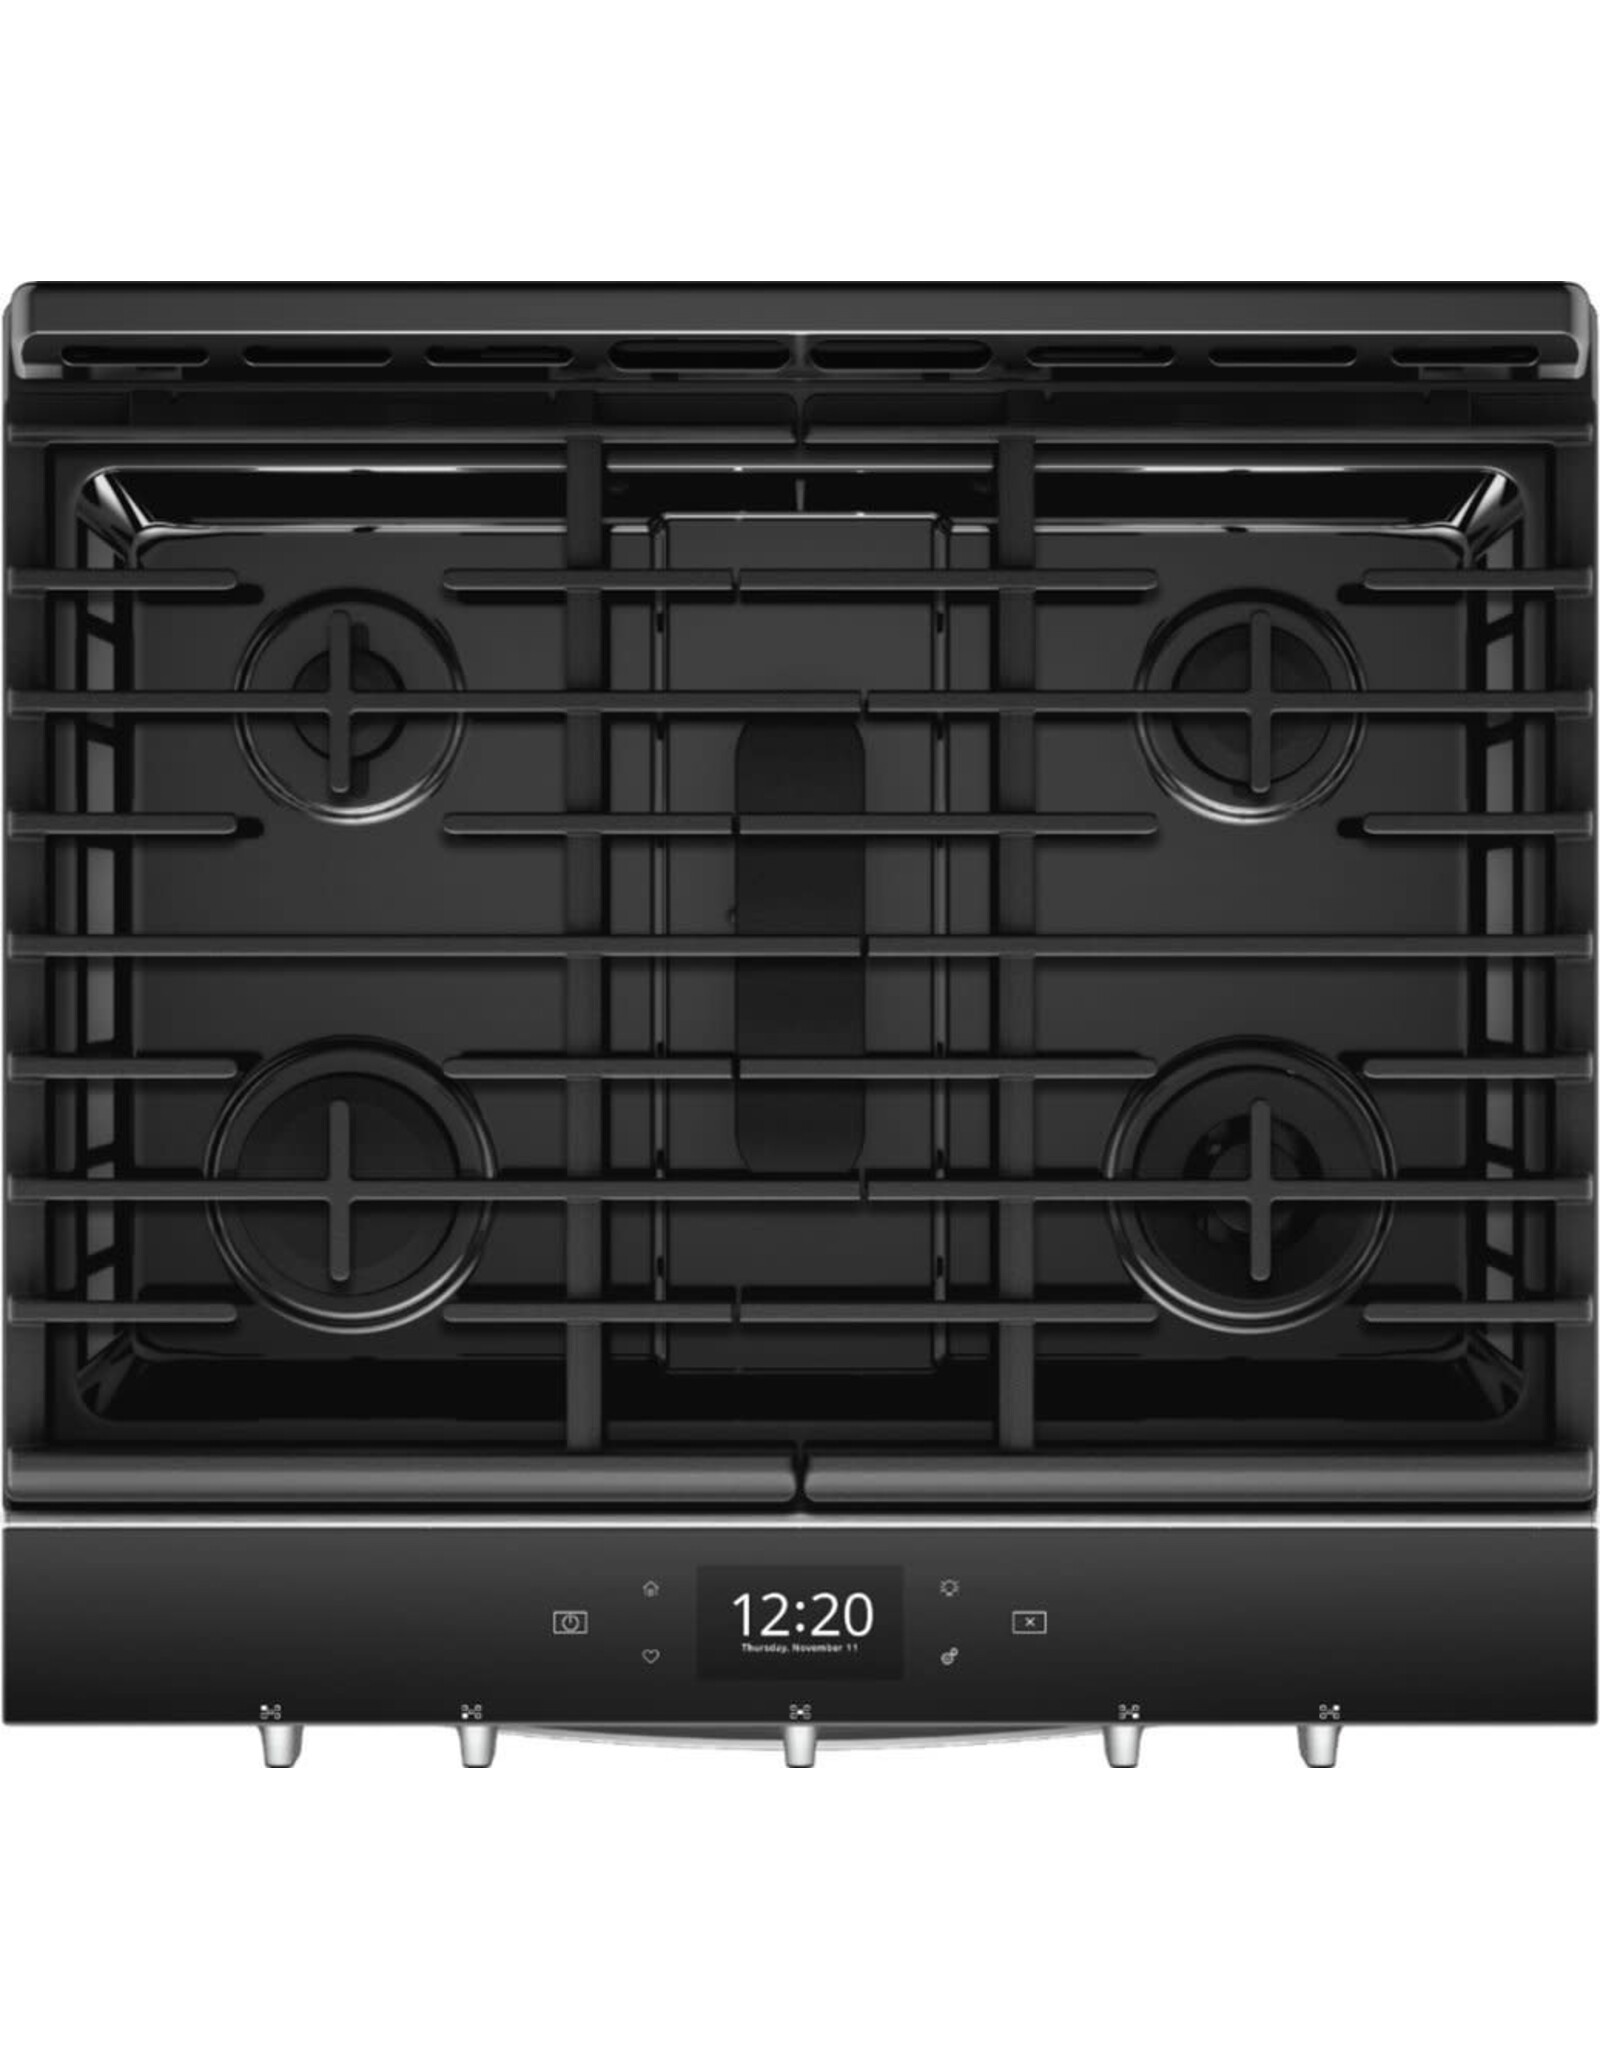 WHIRLPOOL WEG750H0HZ WHR Whirlpool - 5.8 Cu. Ft. Slide-In Gas Convection Range with Self-Cleaning with Air Fry with Connection - Stainless steel